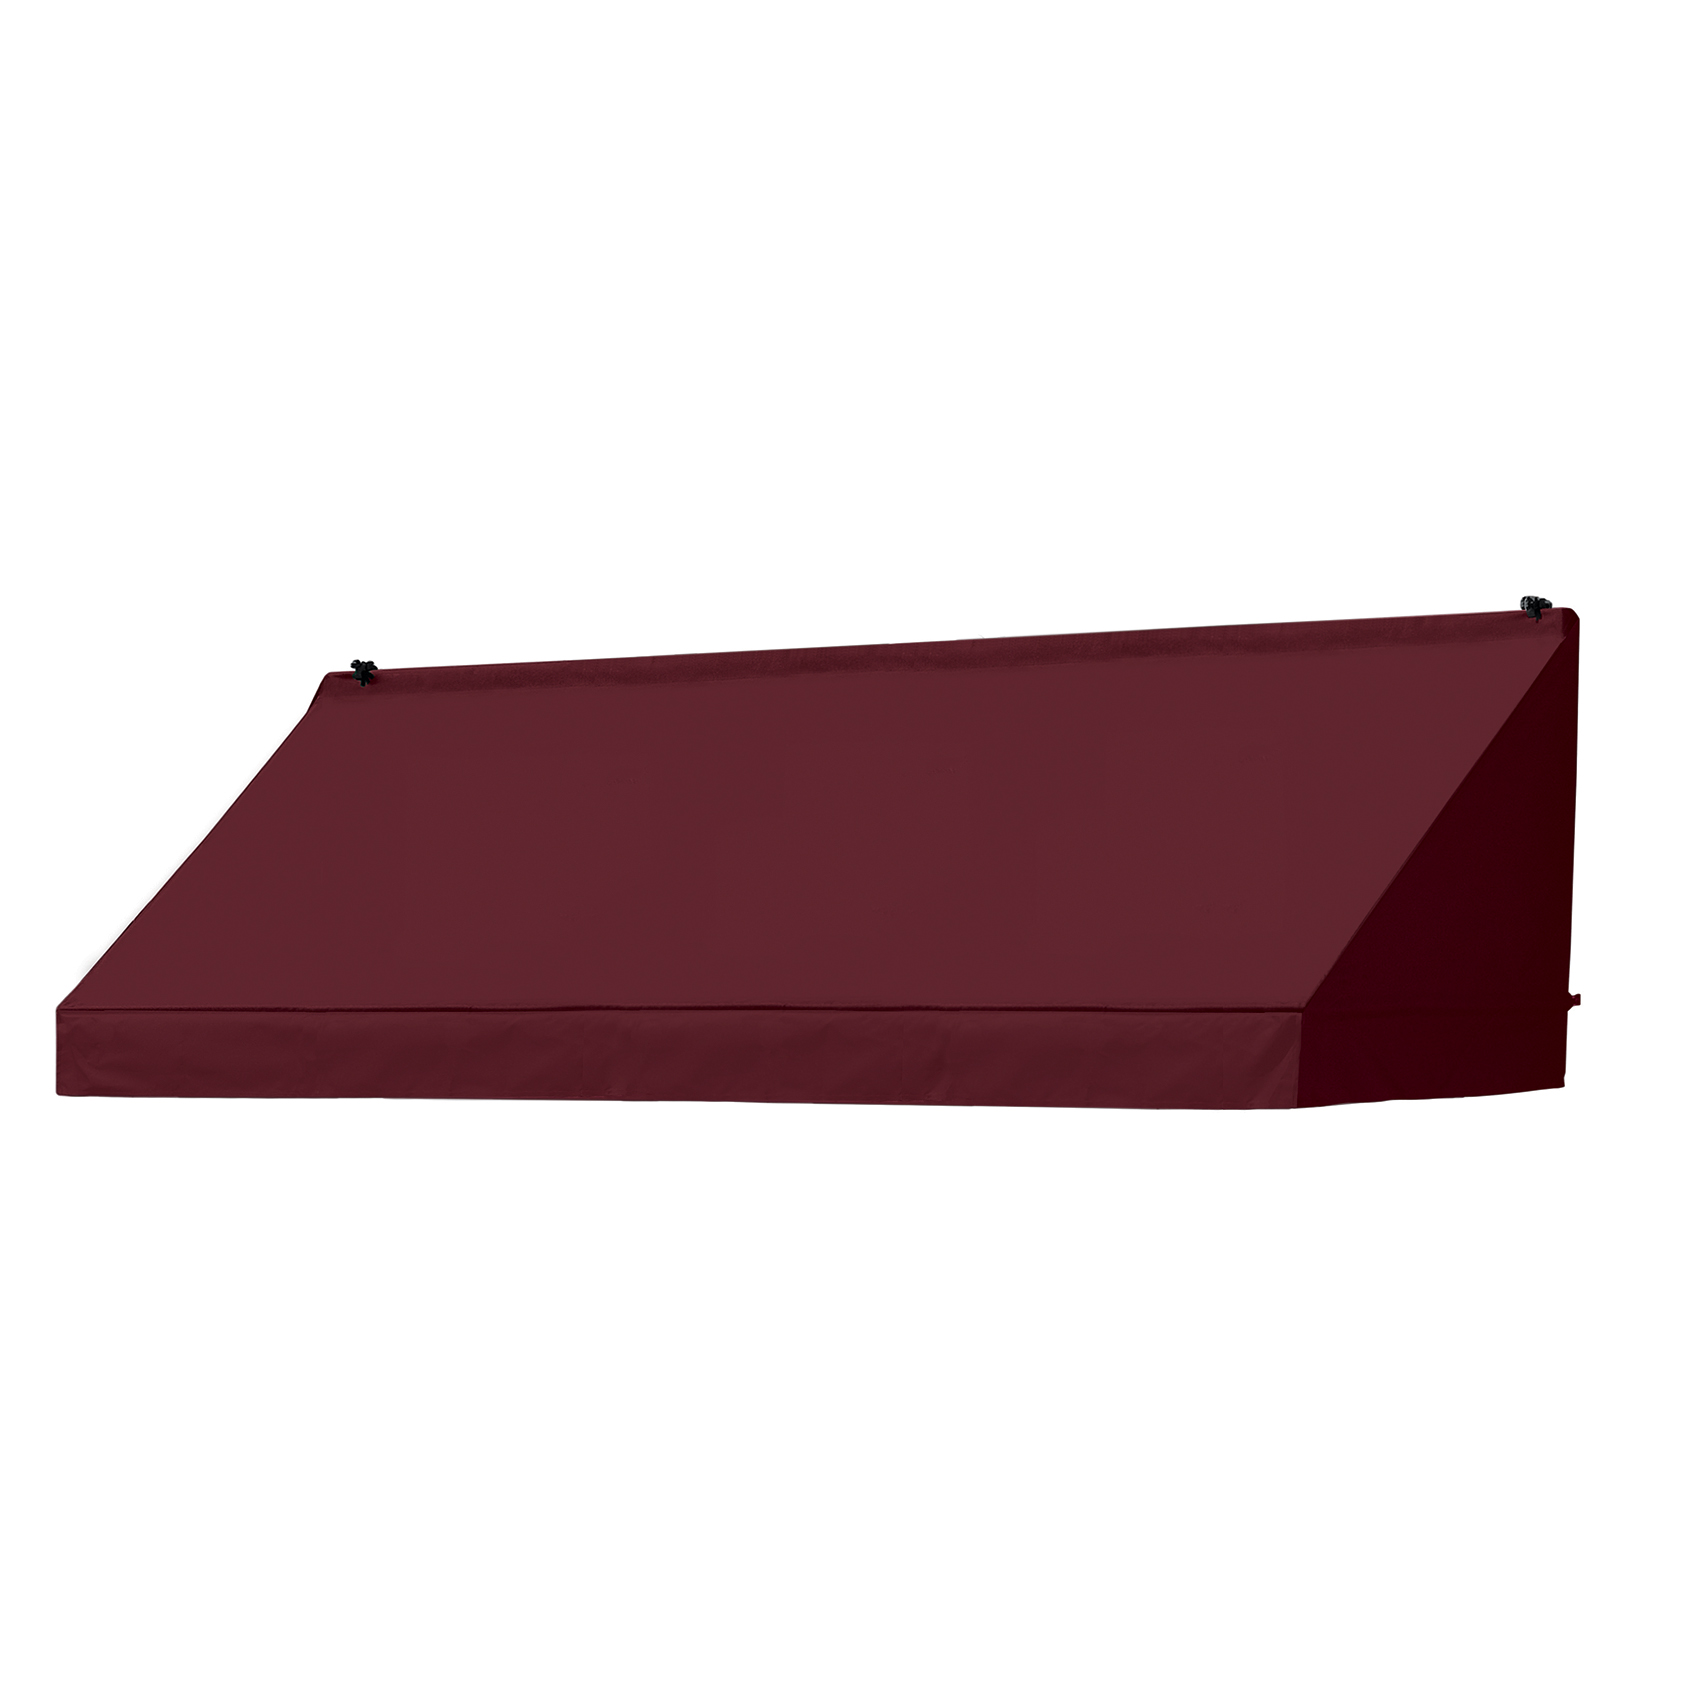 Awnings in a Box&reg; 8' Classic Style Awning Replacement Cover in Assorted Colors